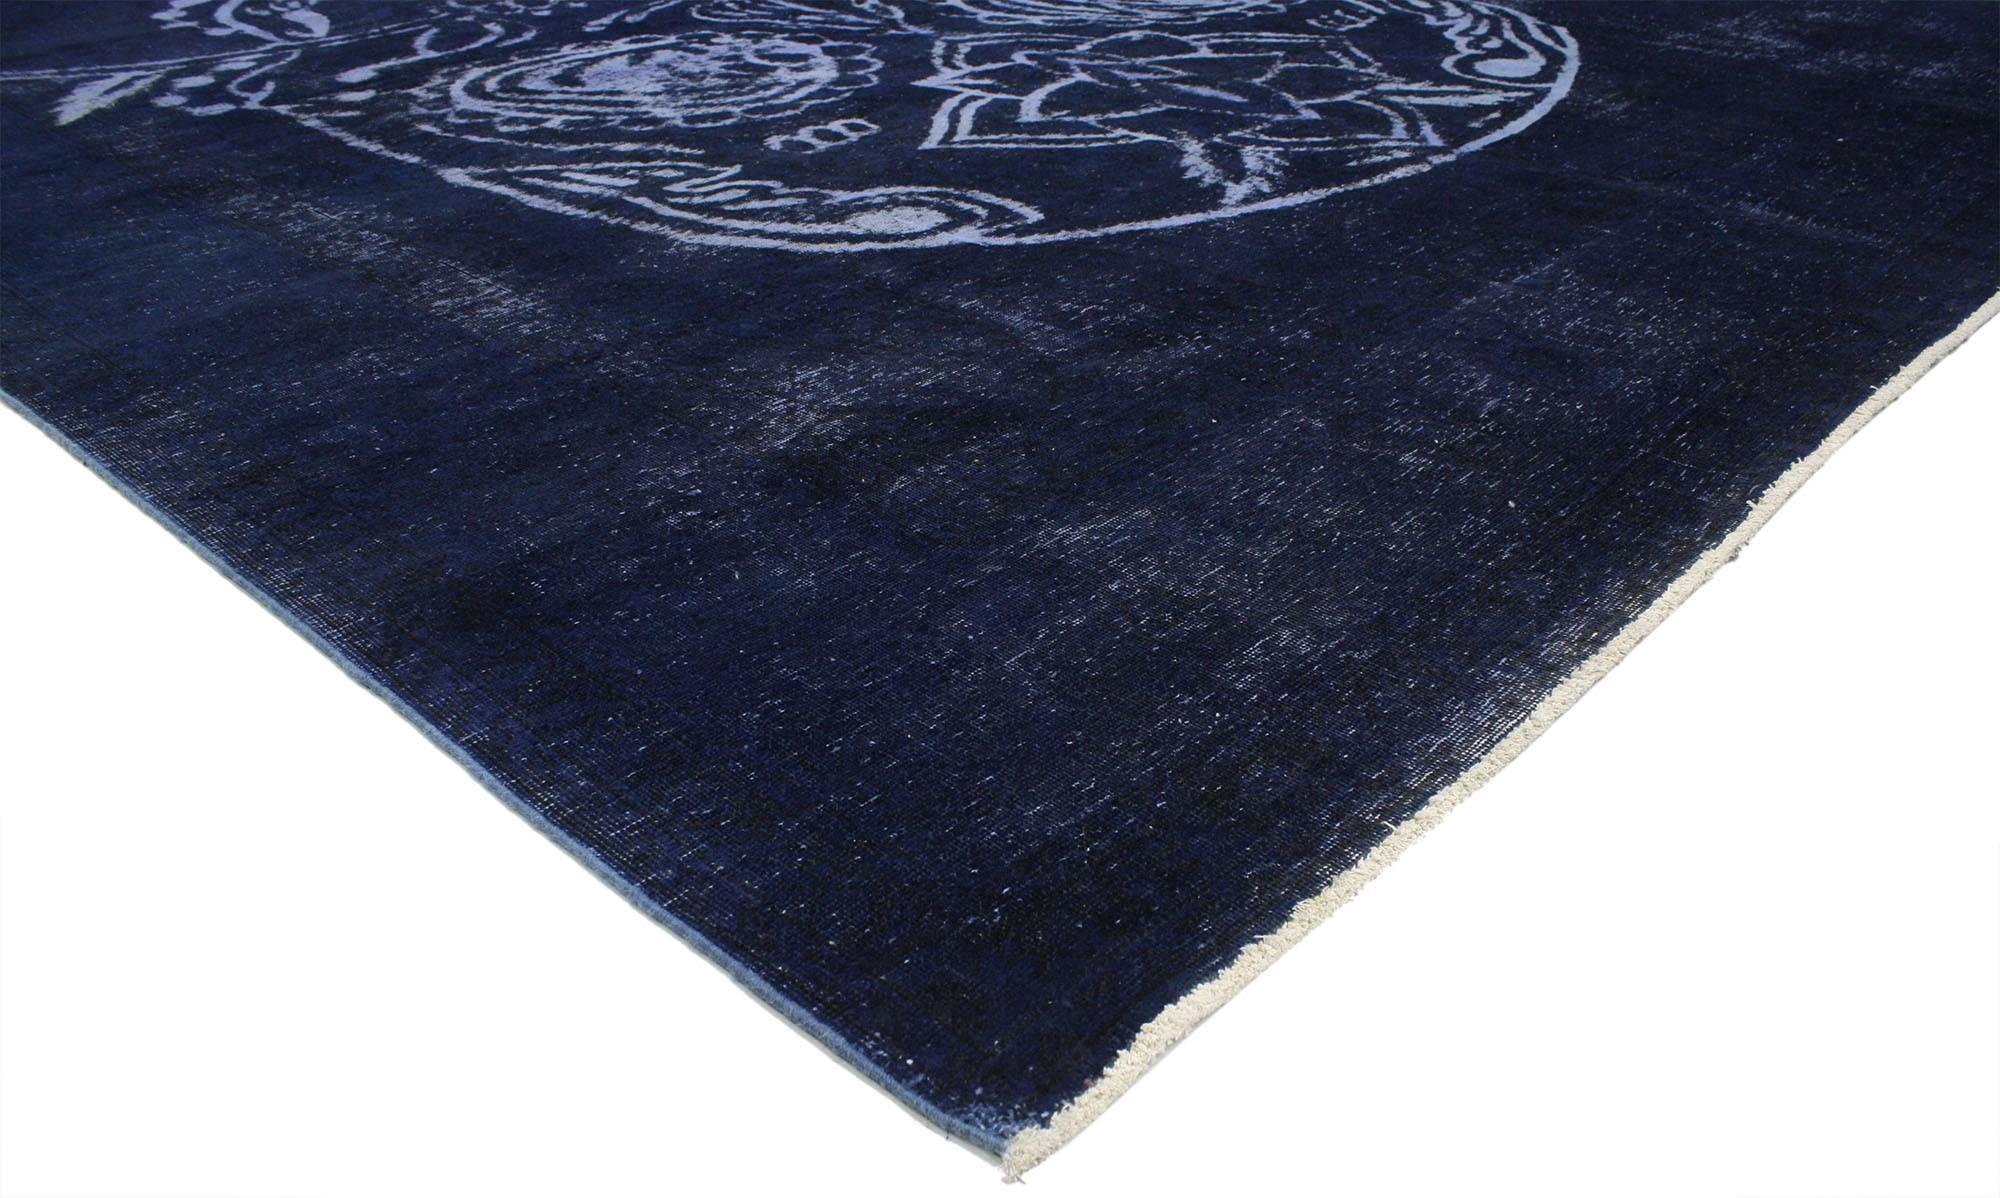 80431, distressed vintage Calavera Sugar Skull rug Inspired by Alexander McQueen. Drawing inspiration from Alexander McQueen, Día de los Muertos, and Disney's Coco movie, this hand knotted wool distressed vintage Calavera skull area rug has been